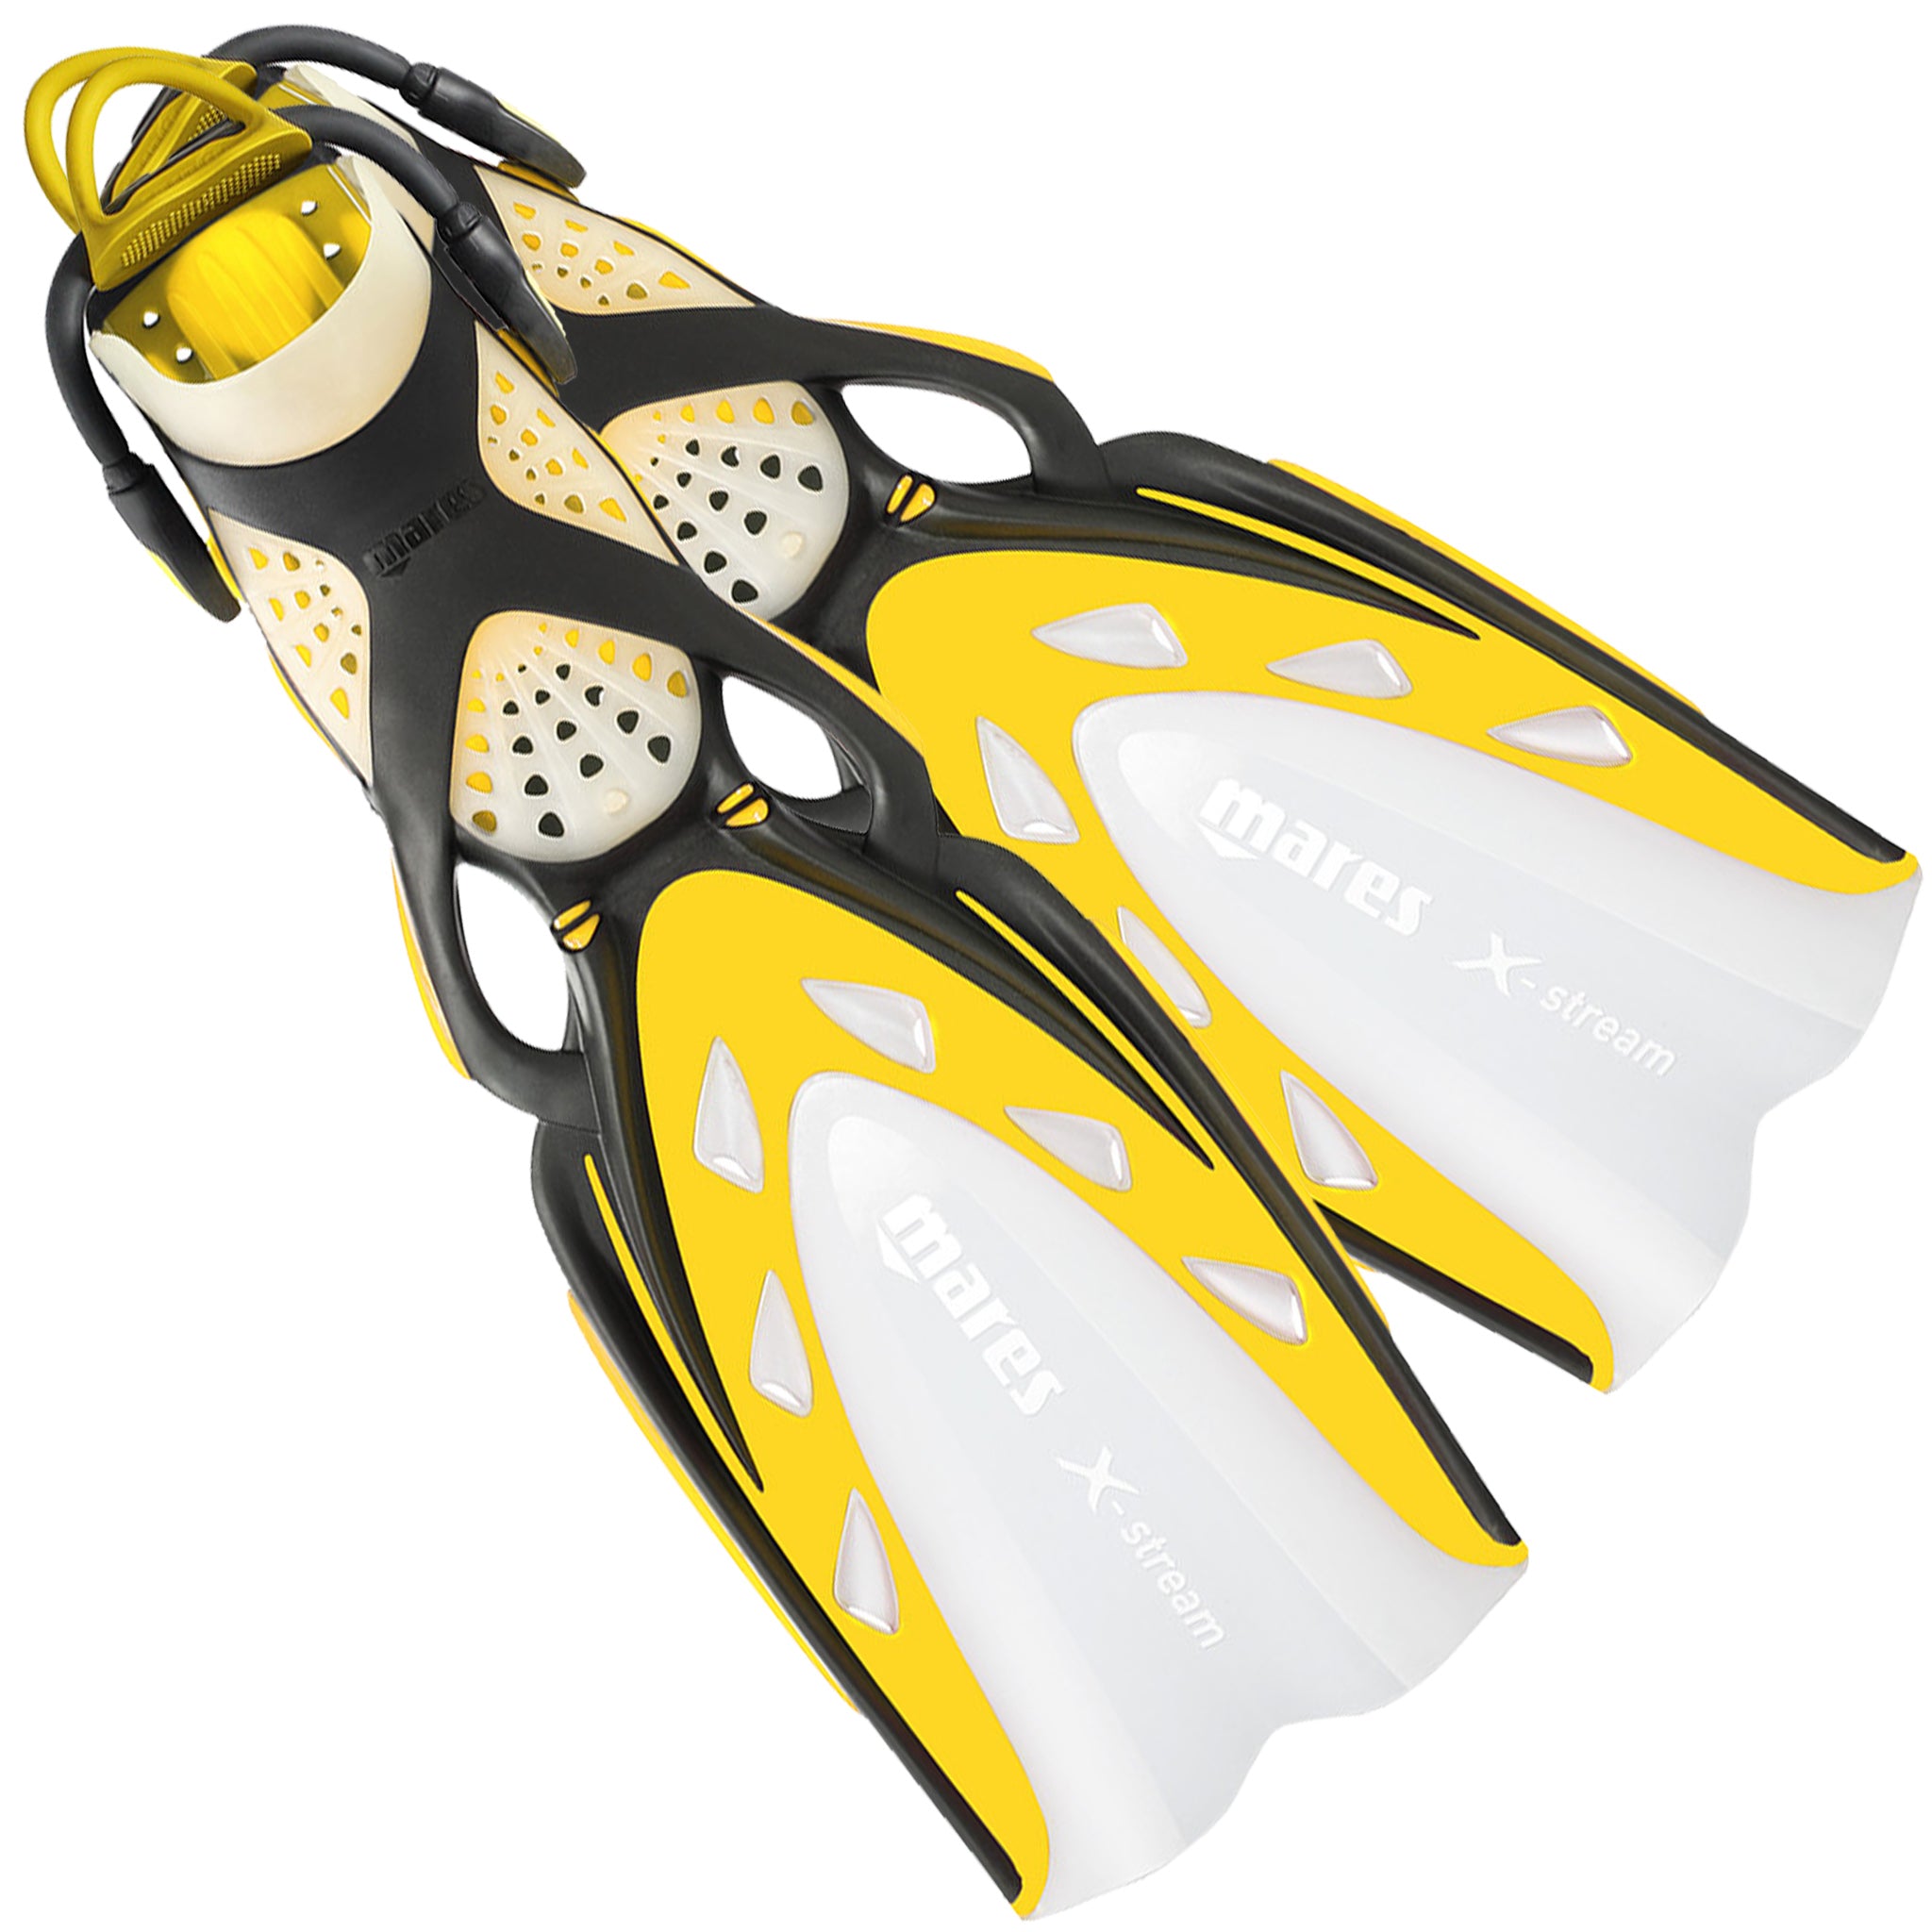 Mares X-Stream Scuba Diving Fins | With Bungee Strap | Yellow